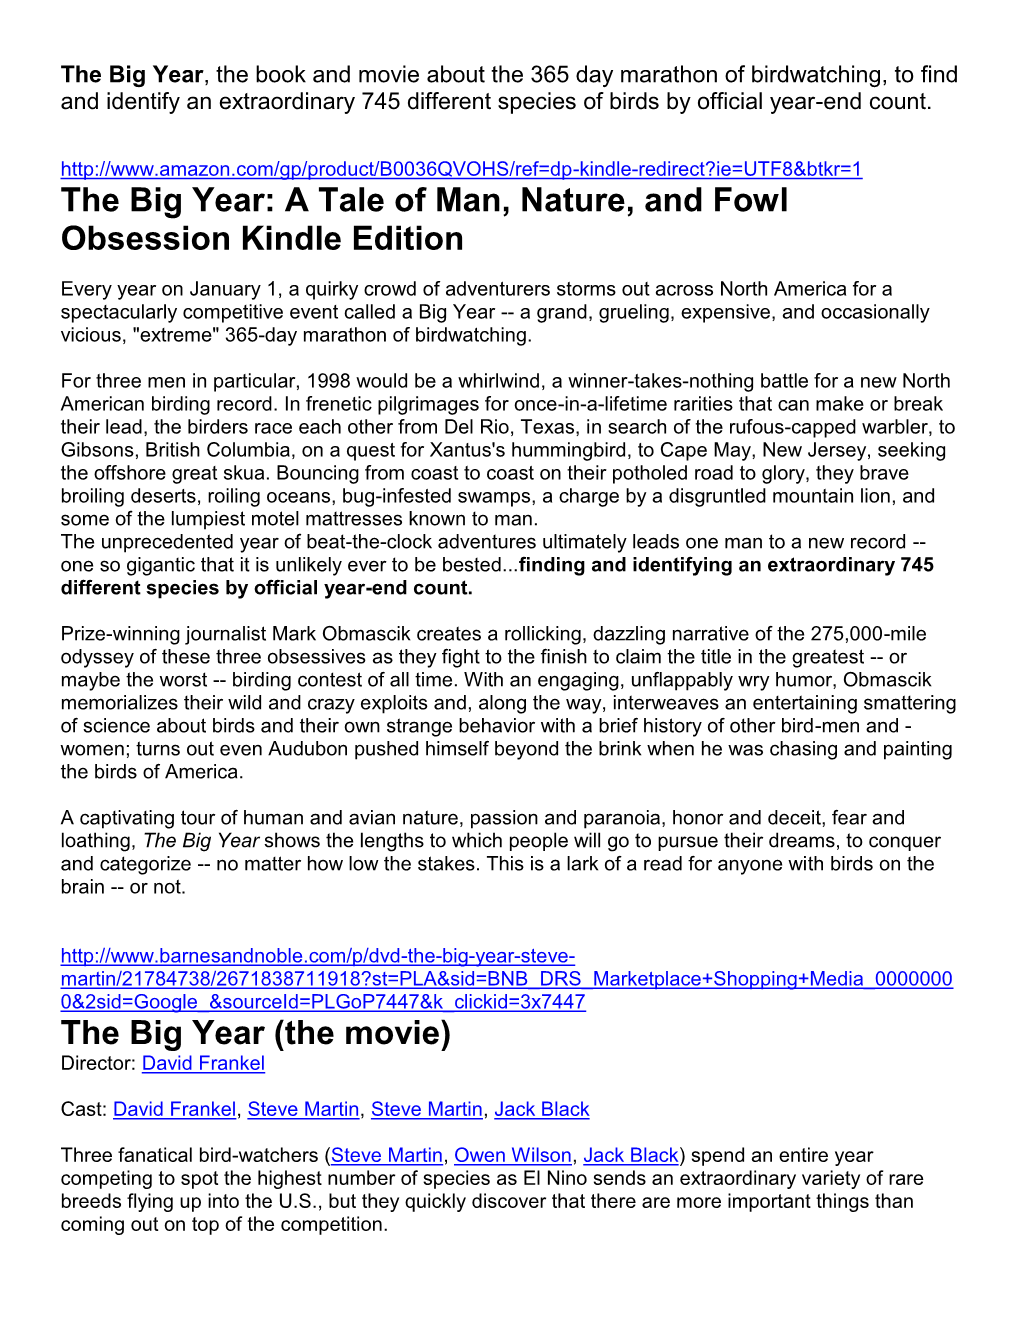 The Big Year: a Tale of Man, Nature, and Fowl Obsession Kindle Edition the Big Year (The Movie)